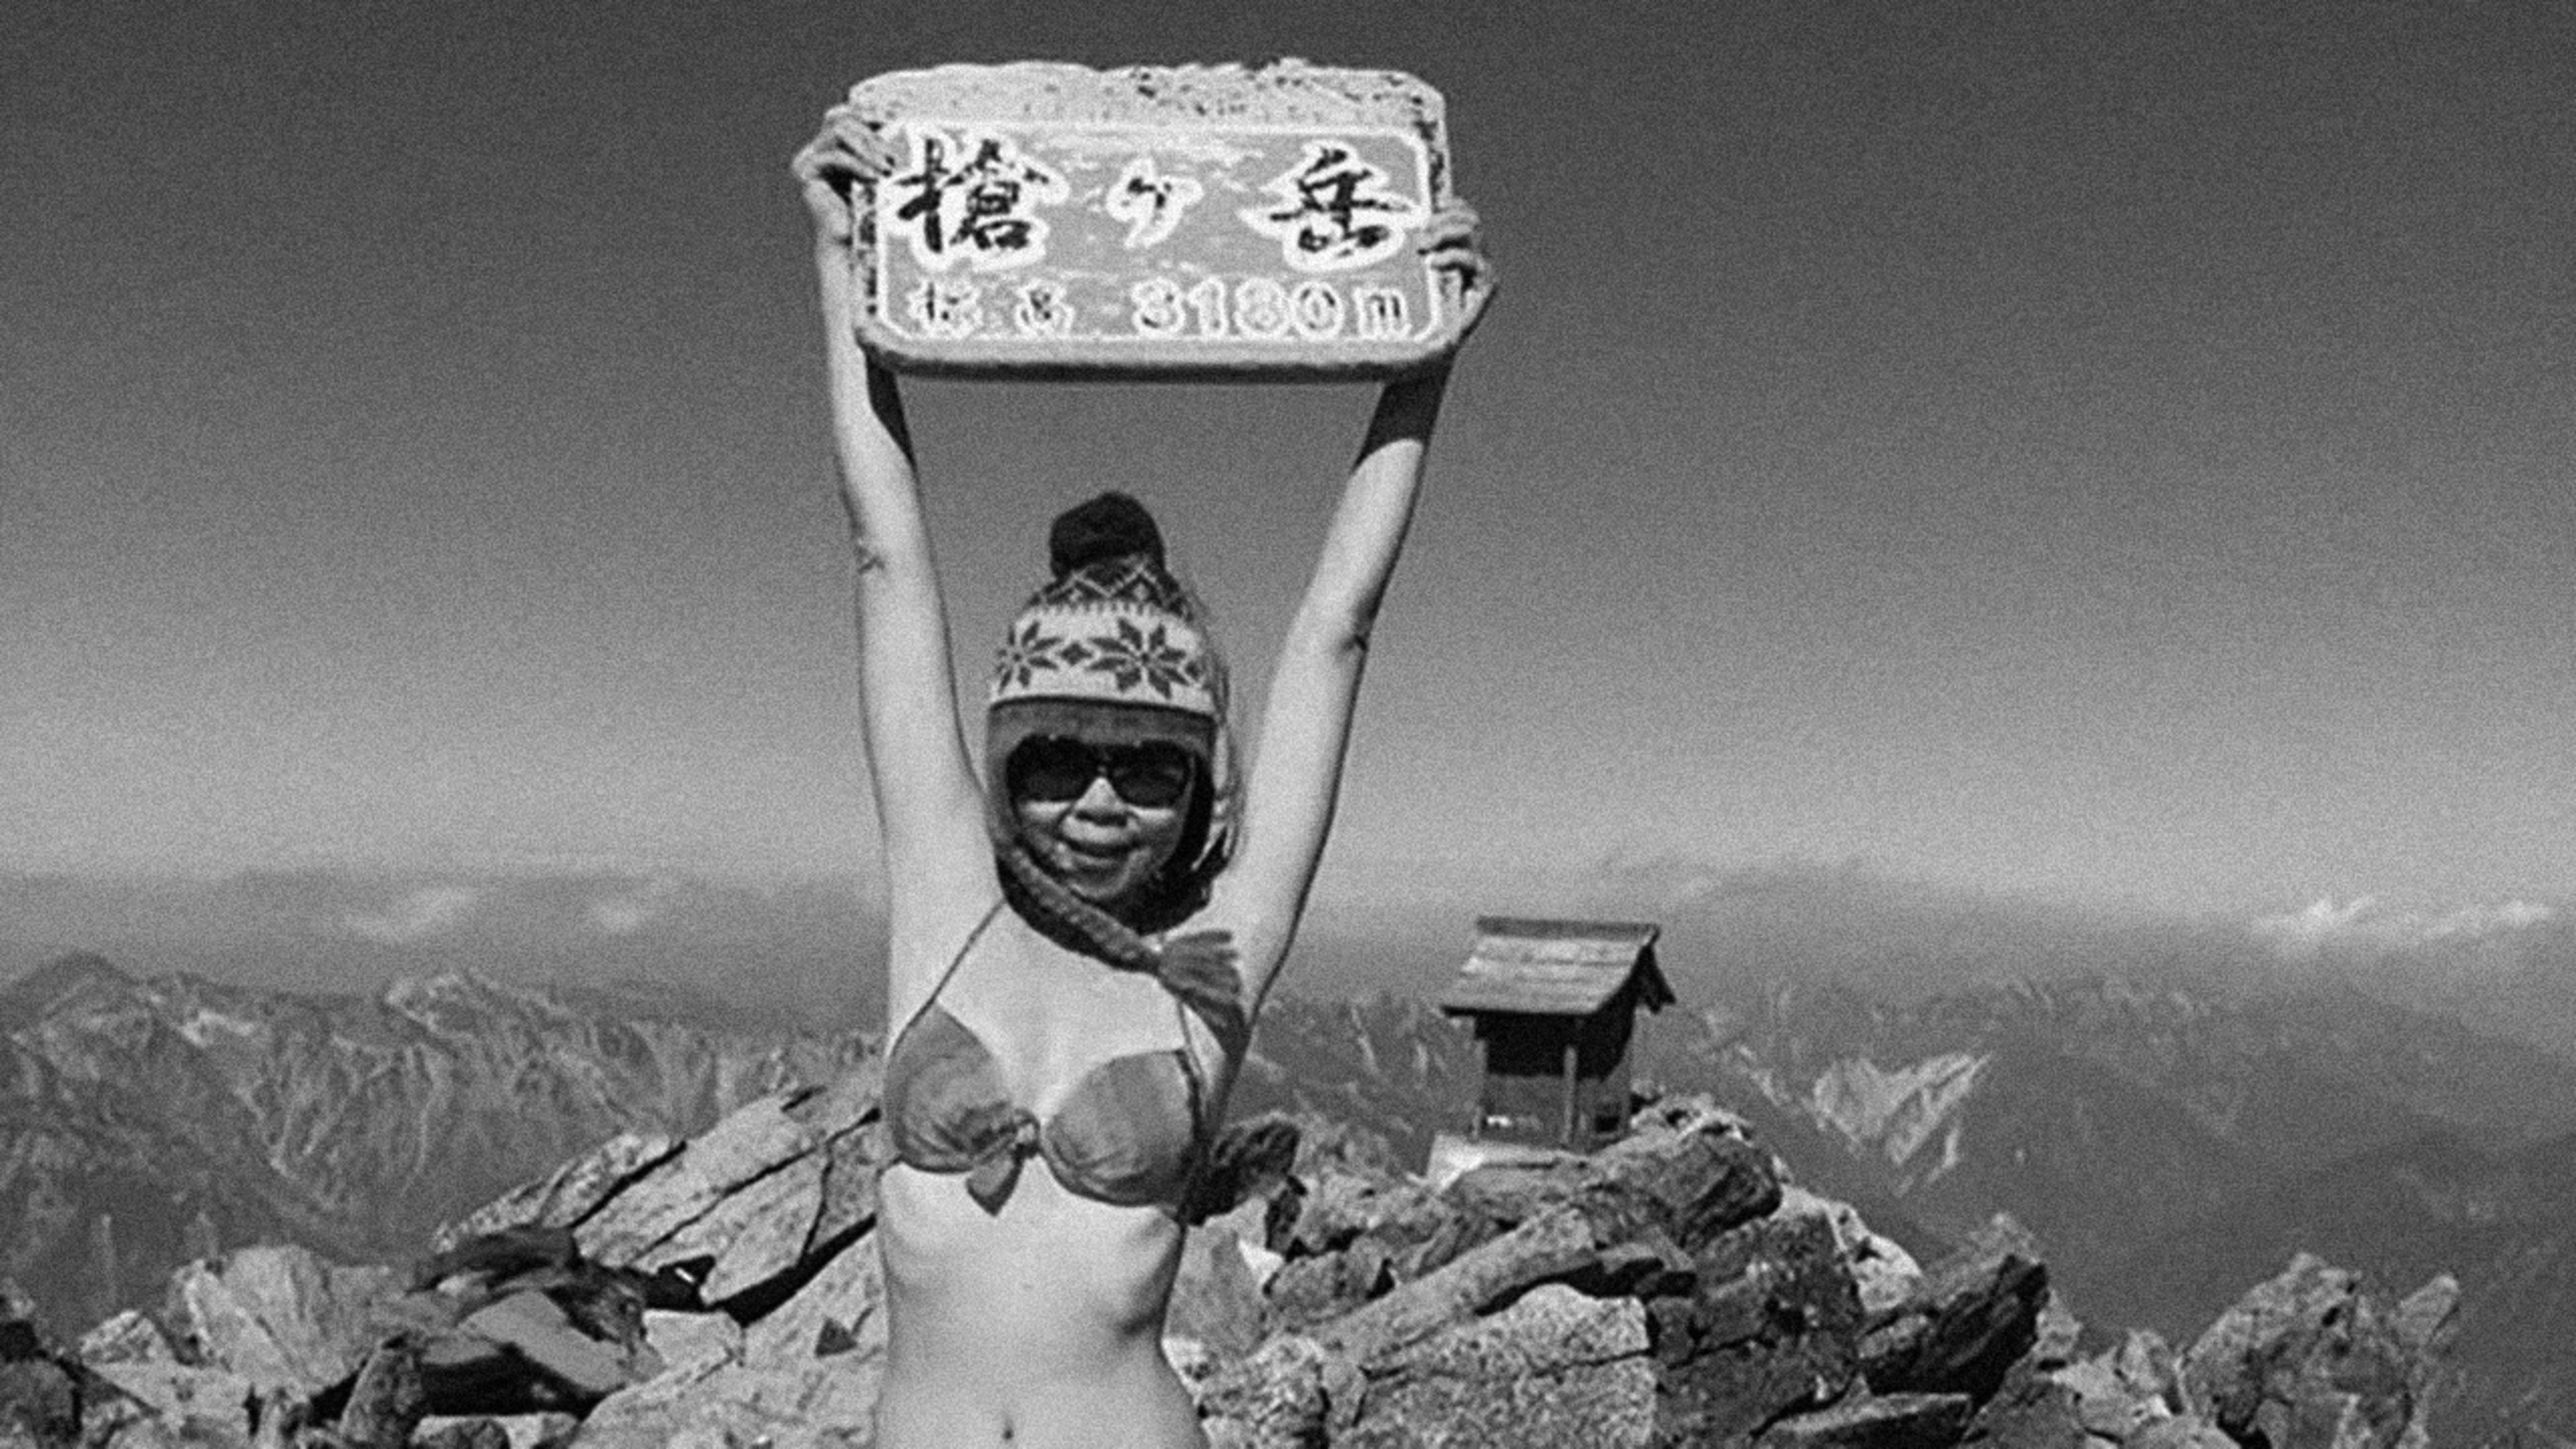 A Facebook star known as “Bikini Climber” dies after falling into ravine